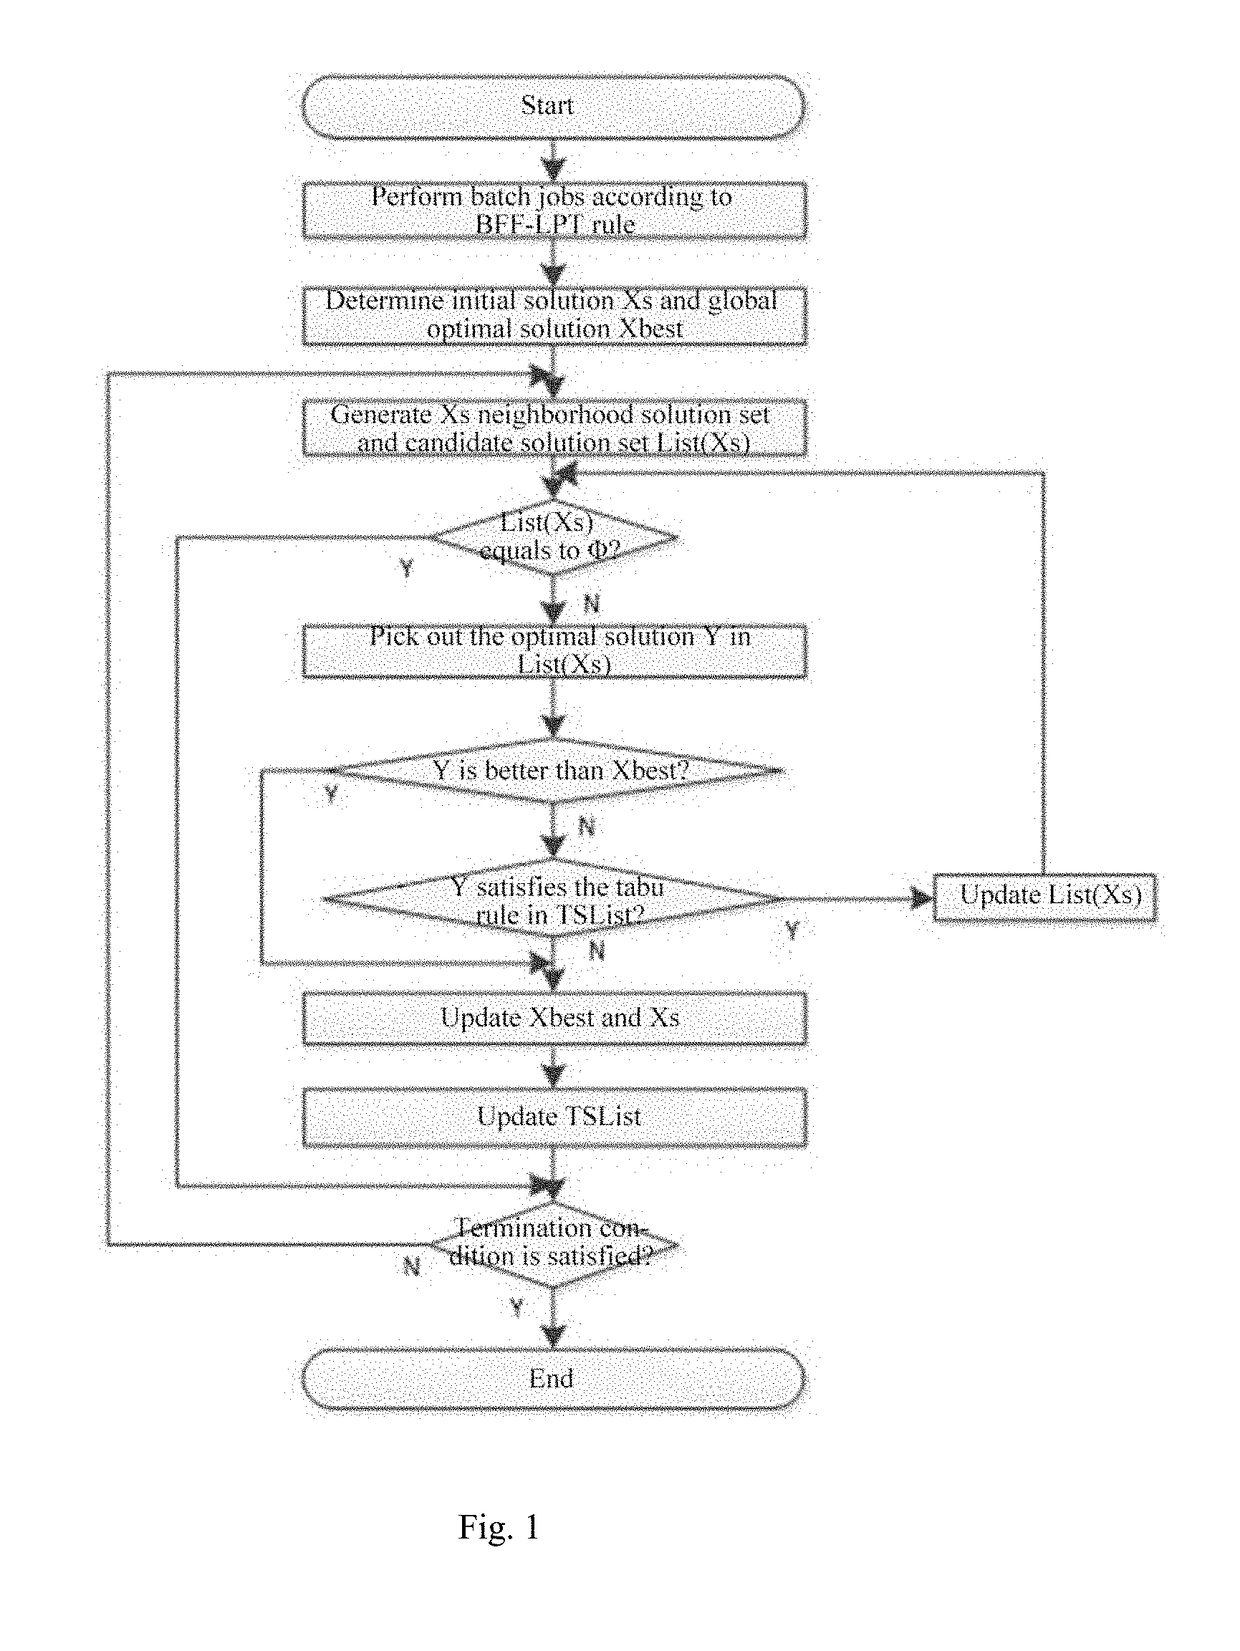 Coordinated Production and Transportation Scheduling Method and System Based on Improved Tabu Search Algorithm